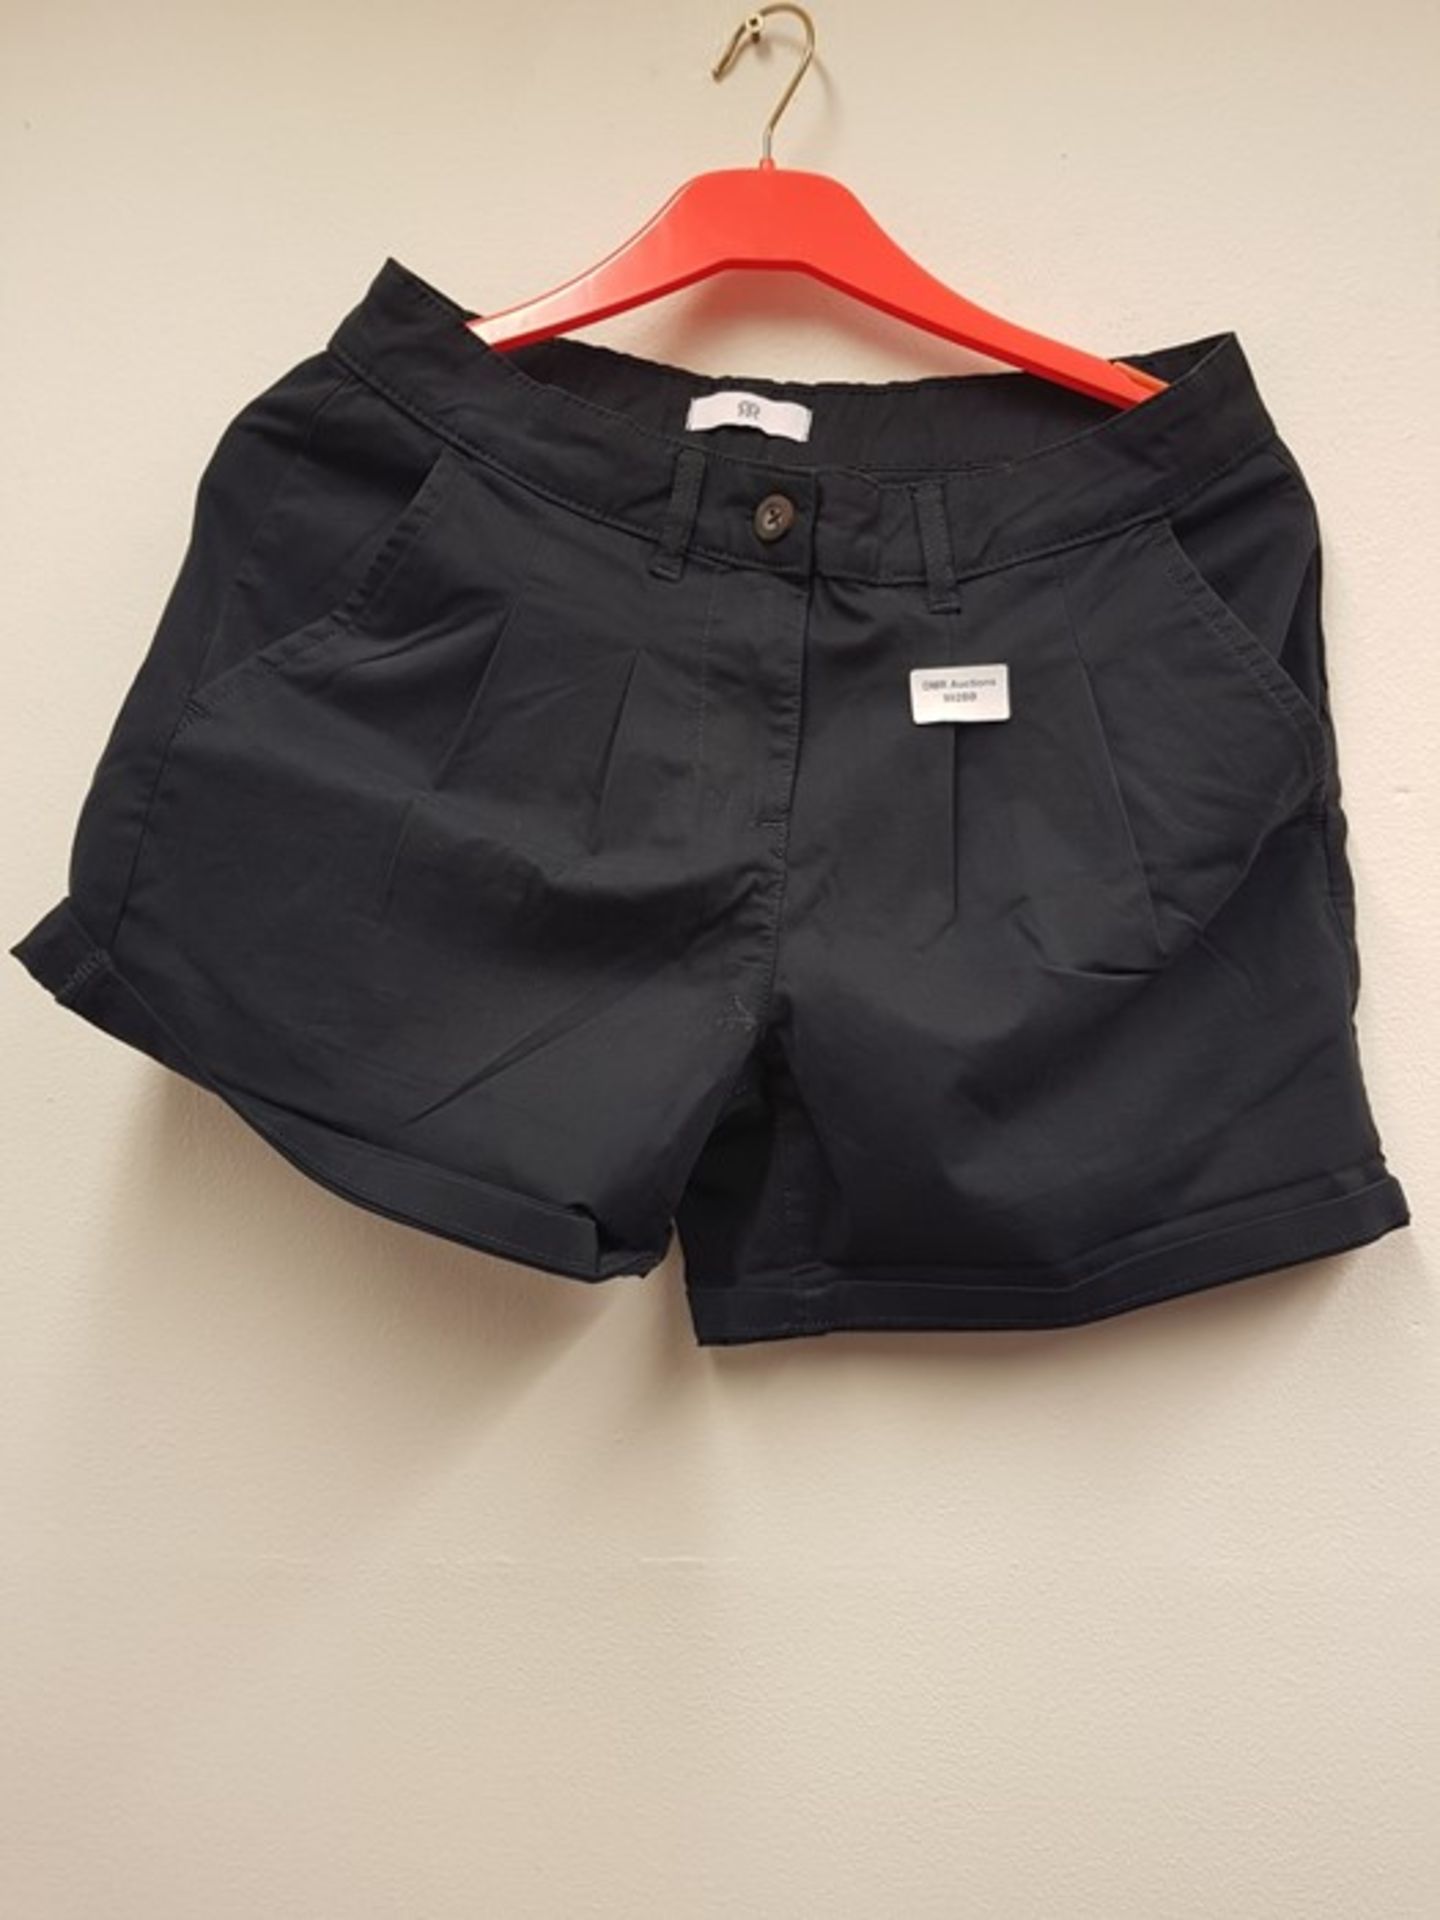 1 AS NEW PAIR OF LA REDOUTE SHORTS IN BLUE / SIZE